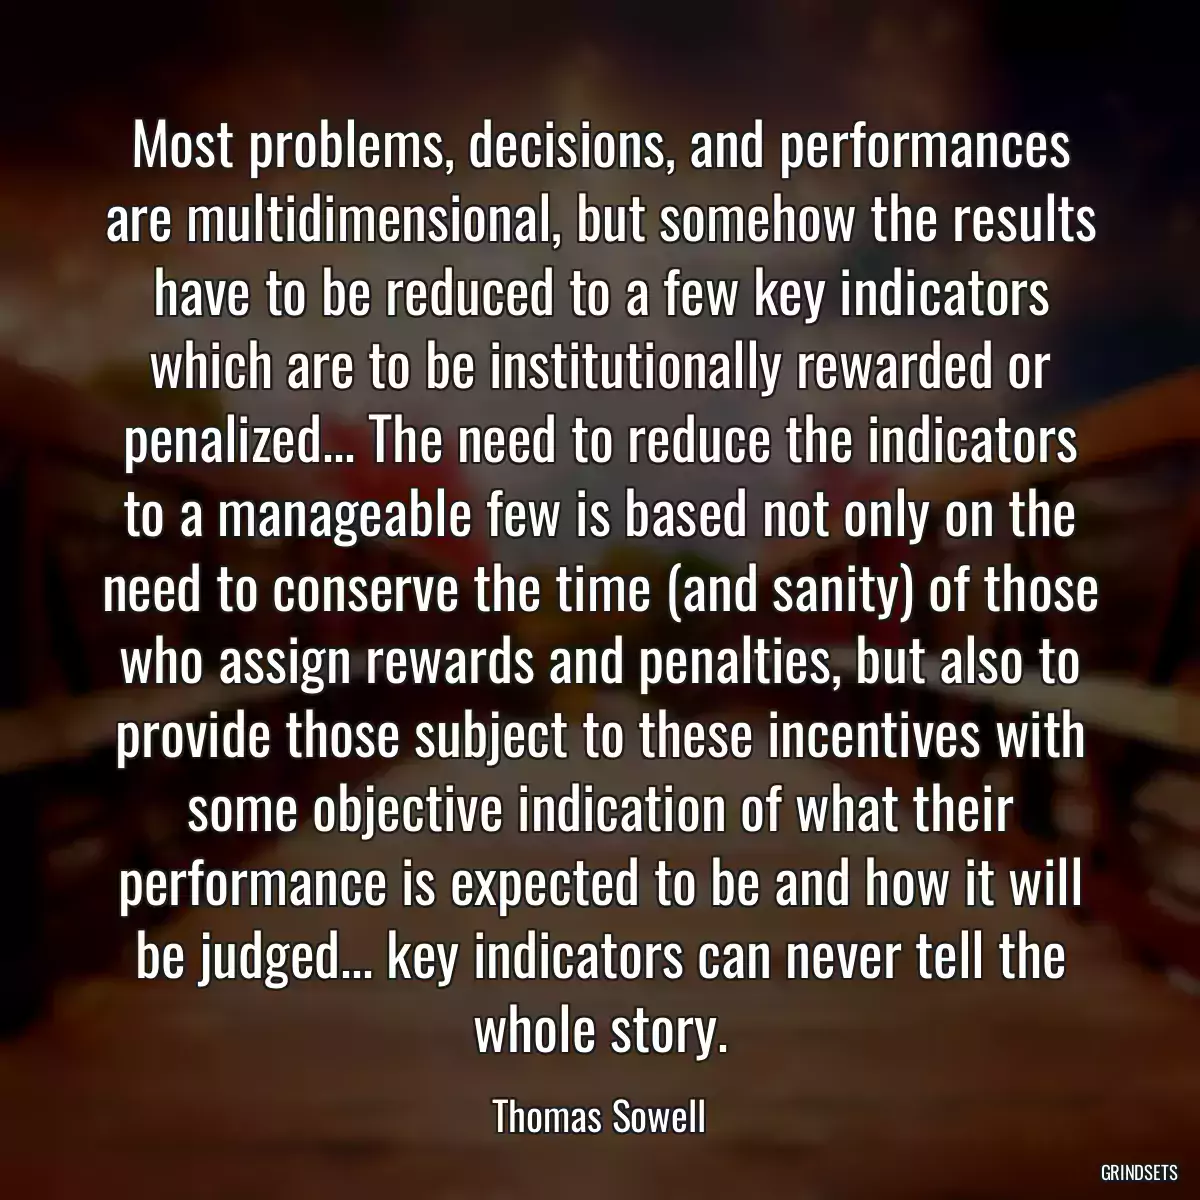 Most problems, decisions, and performances are multidimensional, but somehow the results have to be reduced to a few key indicators which are to be institutionally rewarded or penalized... The need to reduce the indicators to a manageable few is based not only on the need to conserve the time (and sanity) of those who assign rewards and penalties, but also to provide those subject to these incentives with some objective indication of what their performance is expected to be and how it will be judged... key indicators can never tell the whole story.